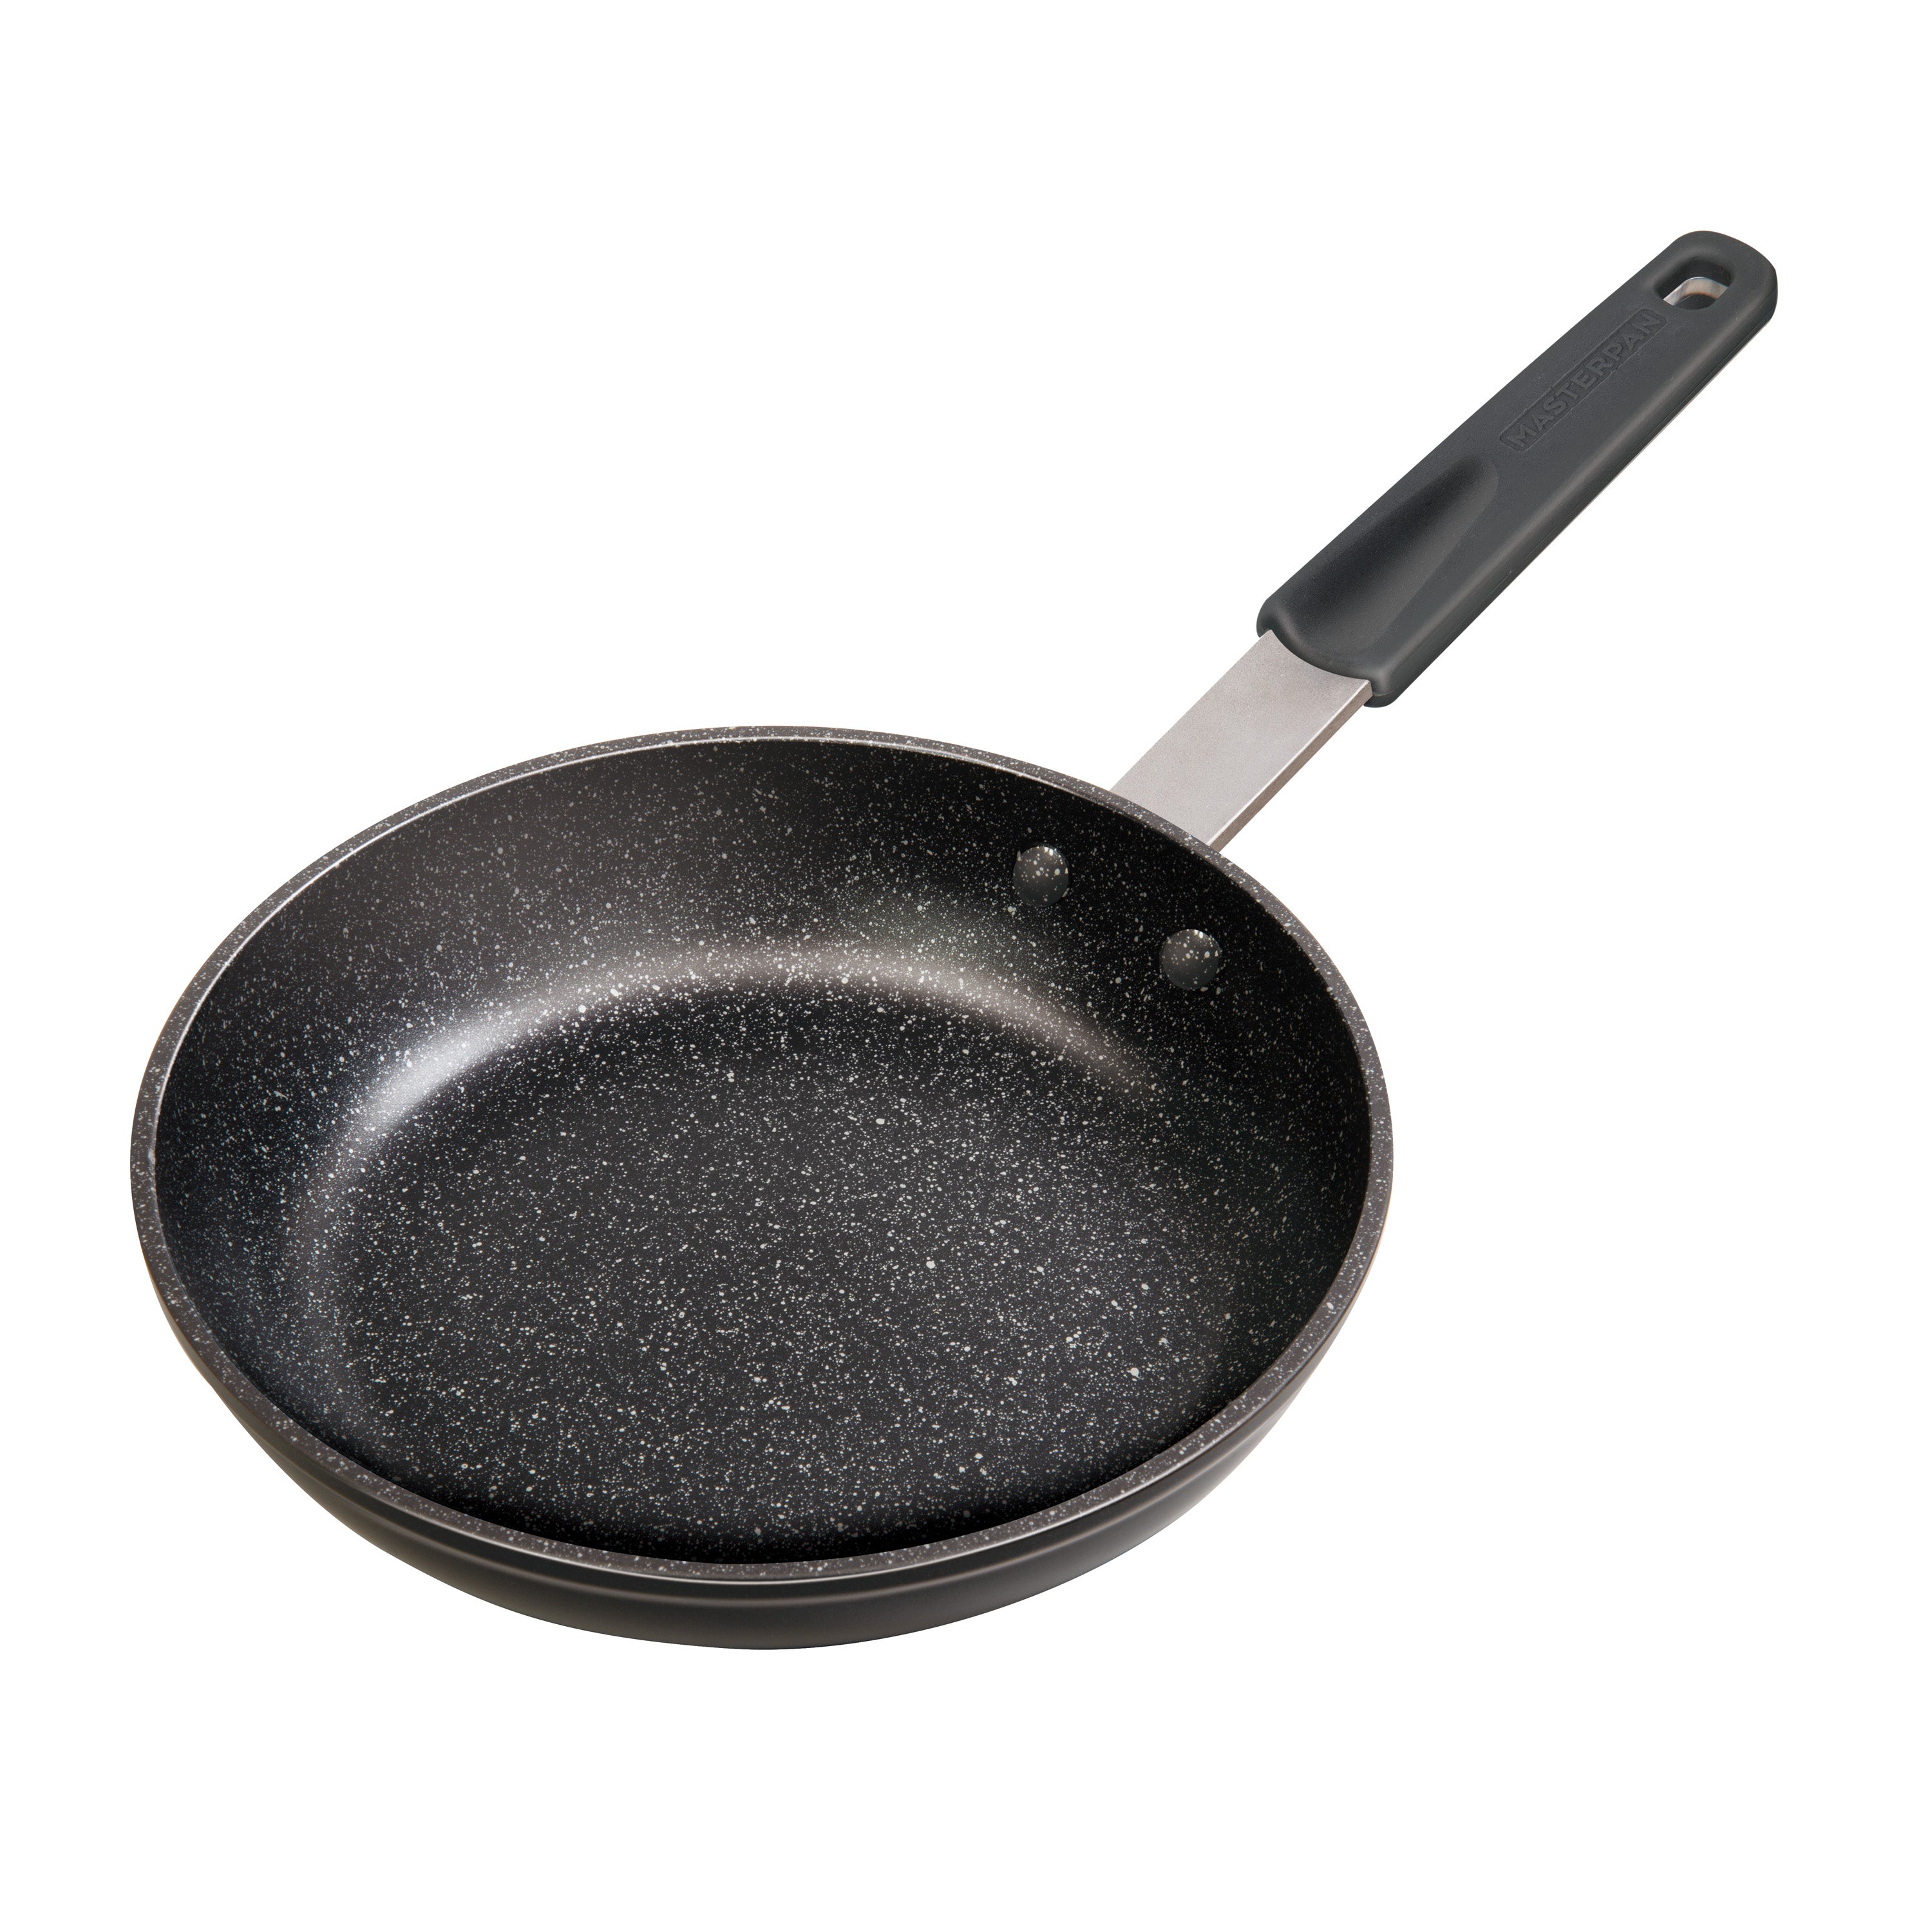 9.5 in Non-Stick Frying Pan w/ Detachable Handle Lid Skillet Fit